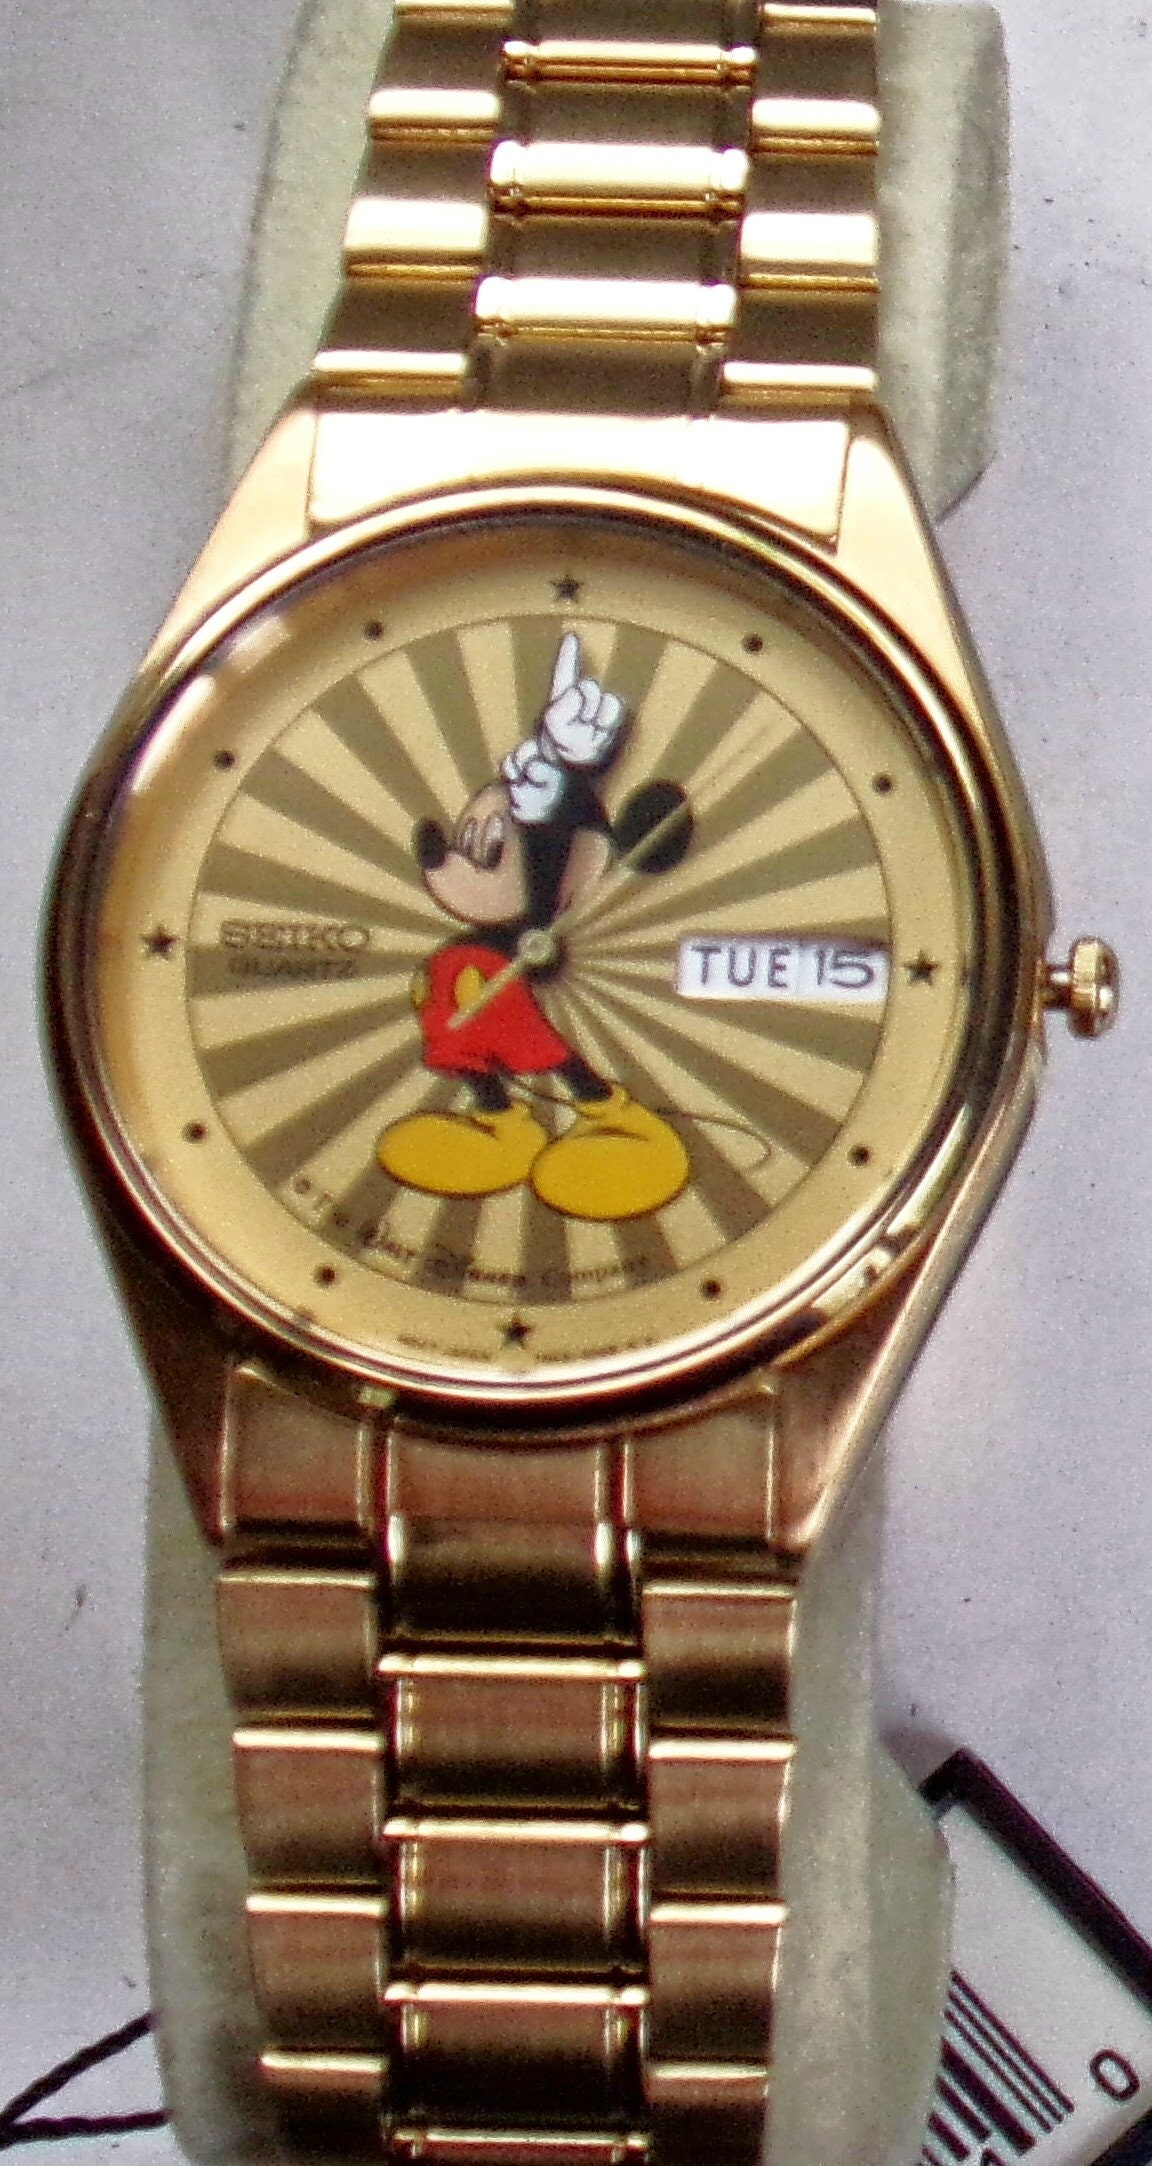 Brand-new Seiko Mens Mickey Mouse Watch Starburst Dial - Etsy